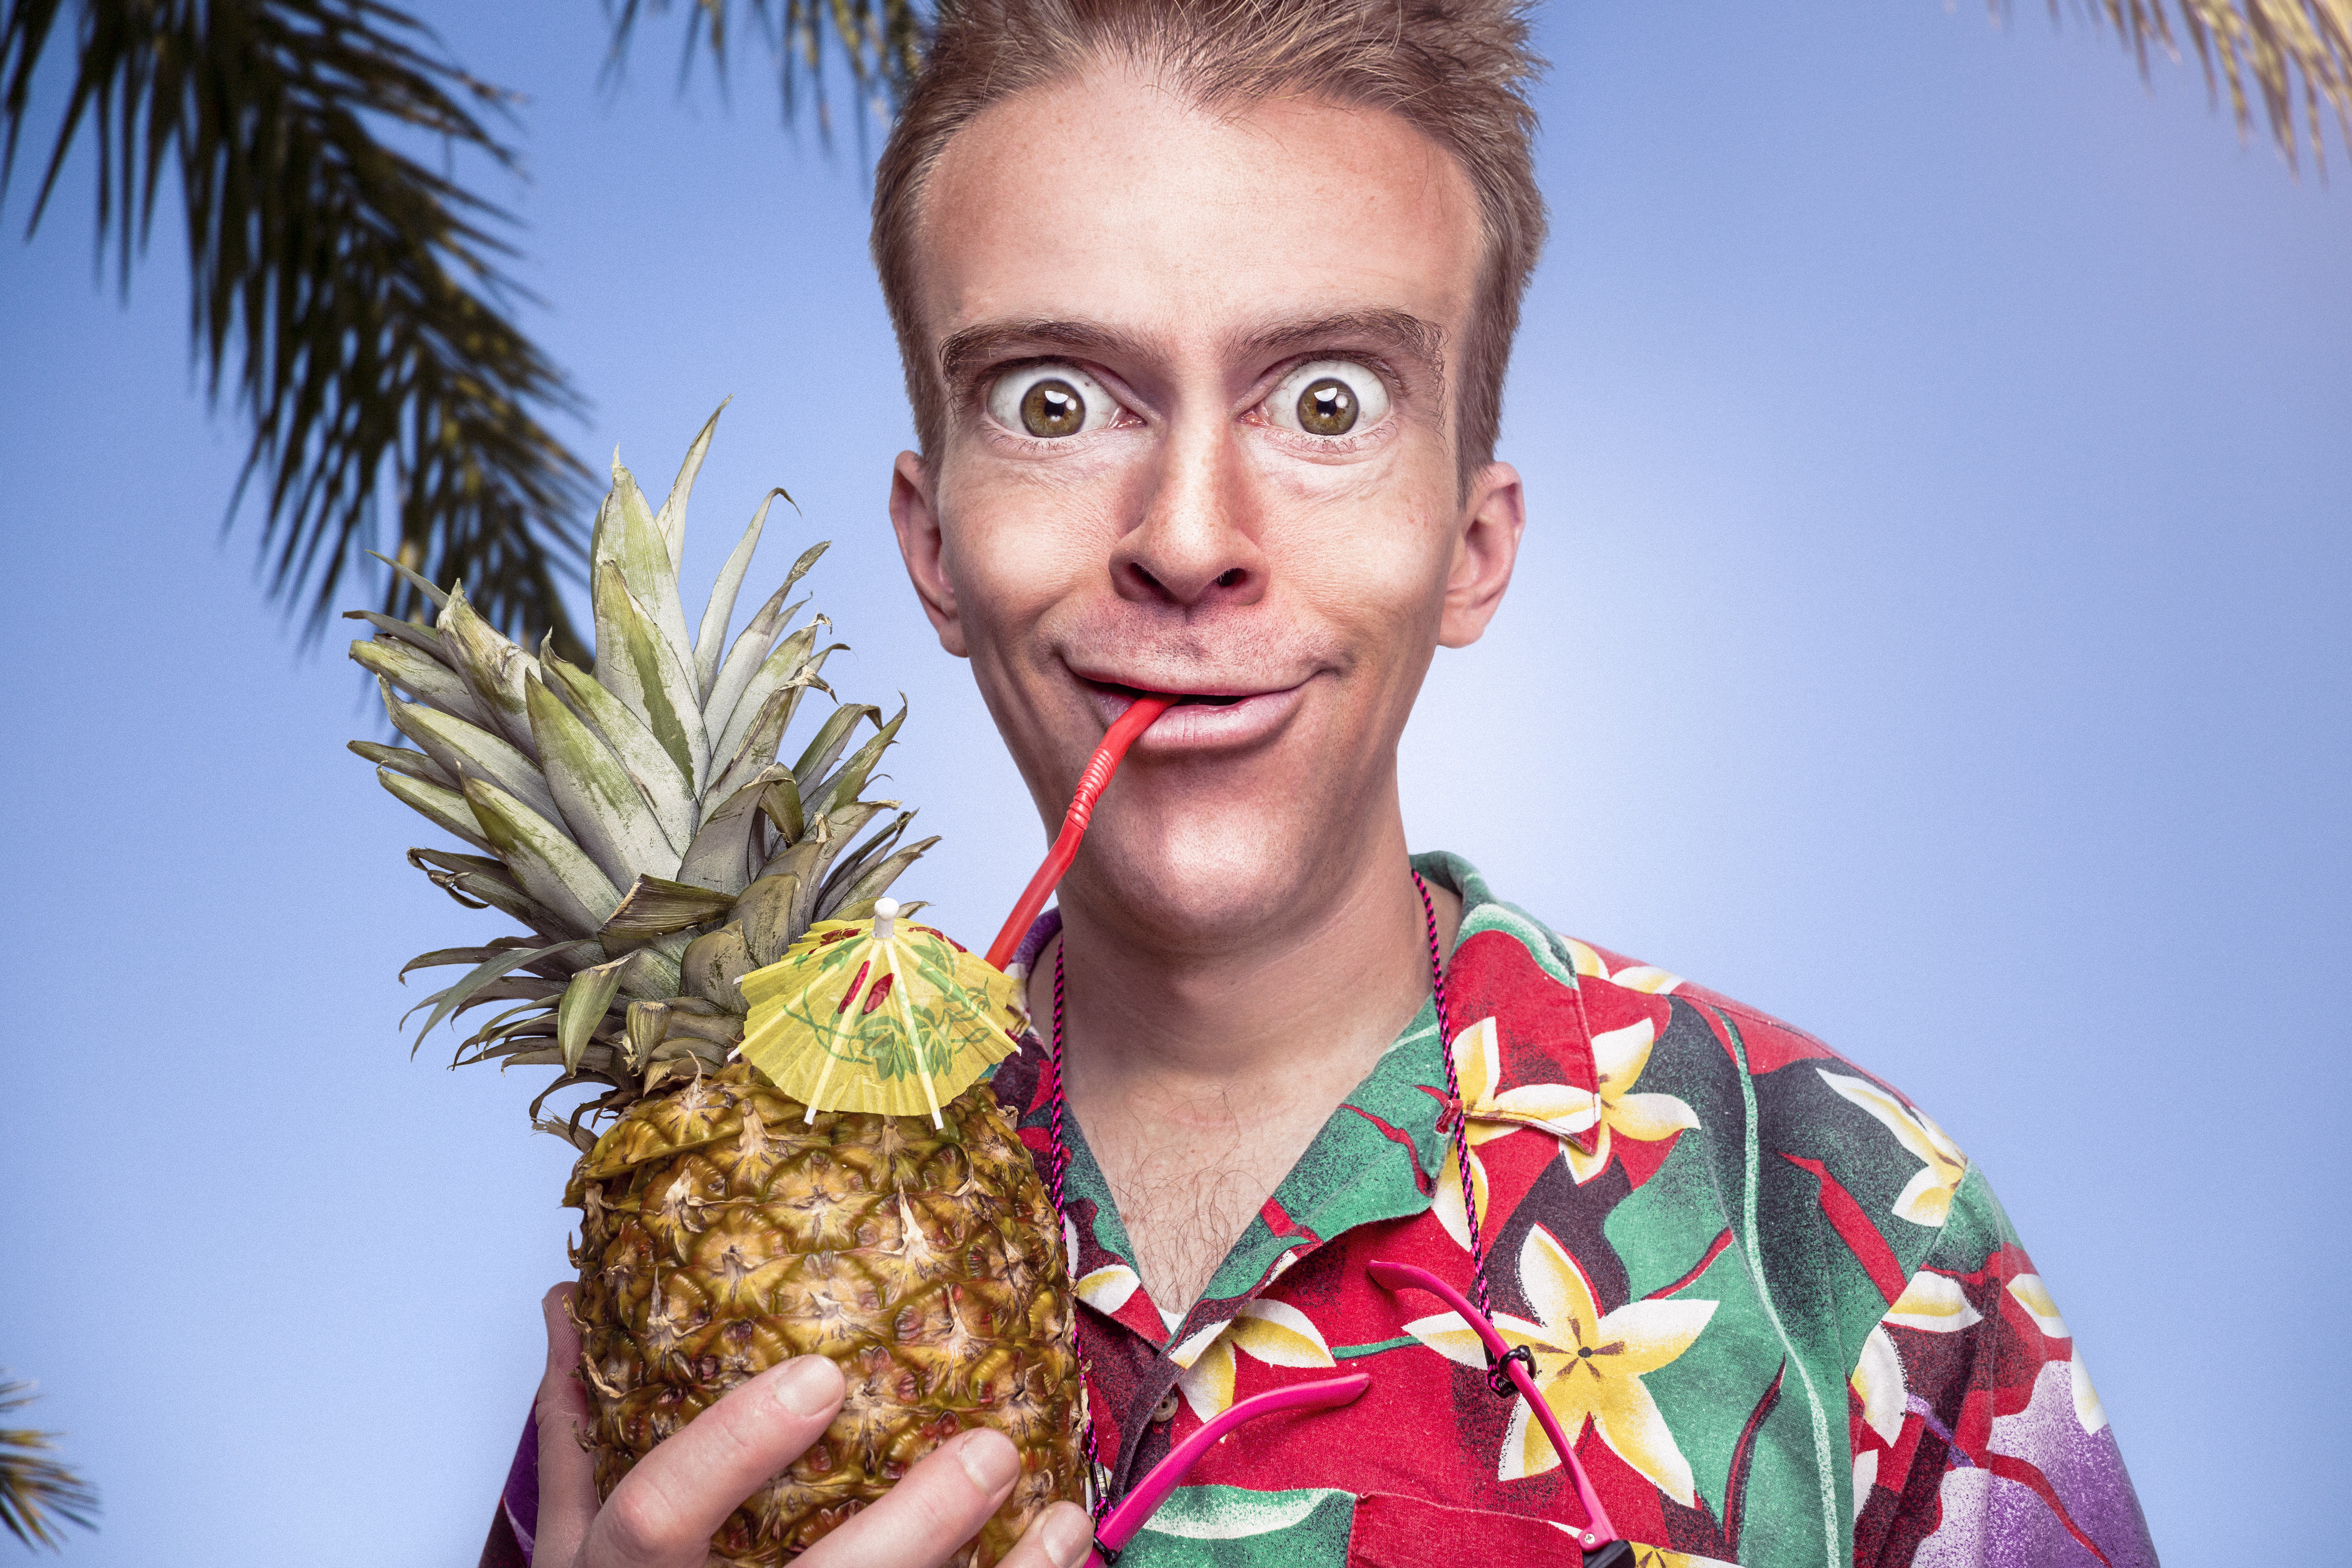 odd man drinking from a pineapple